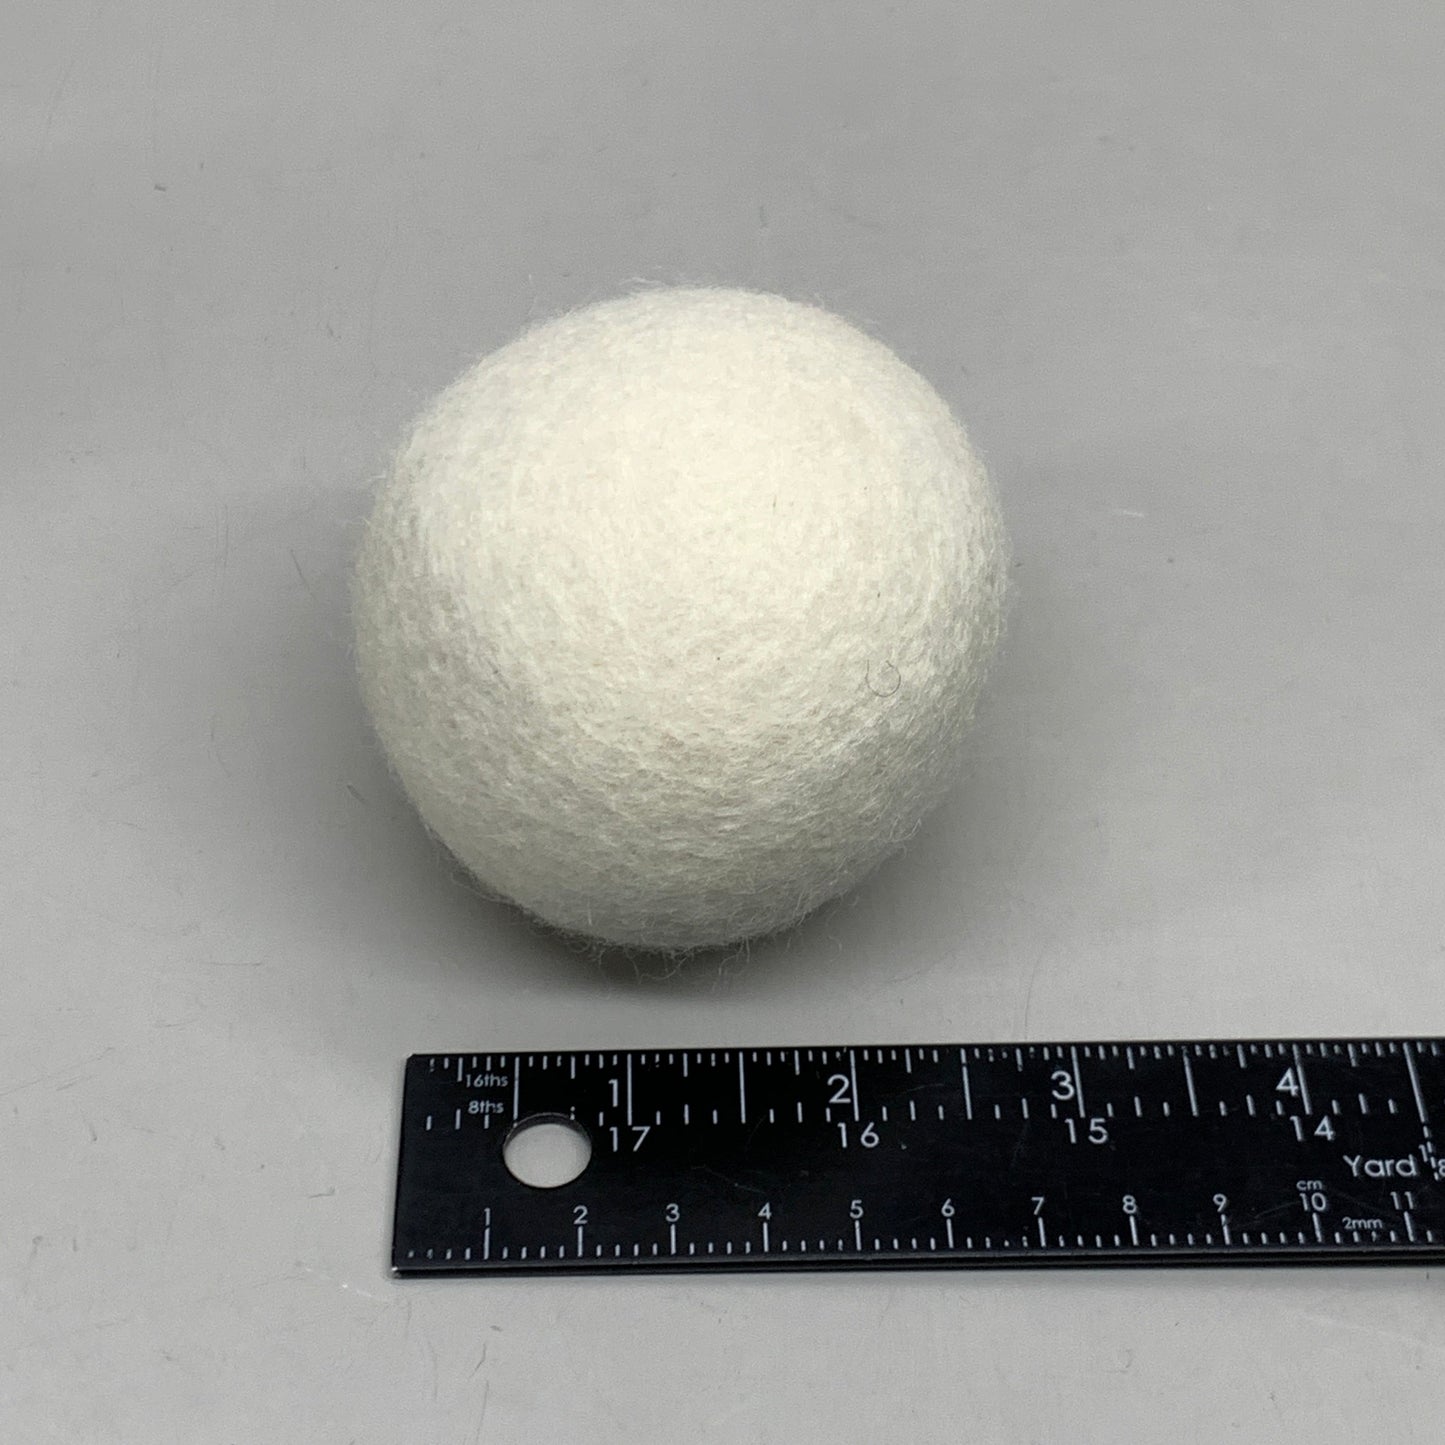 ZA@ MOLLY'S SUDS (2 PACK) Natural Wool Dryer Balls Natural Fabric Softener 6 Balls Total C